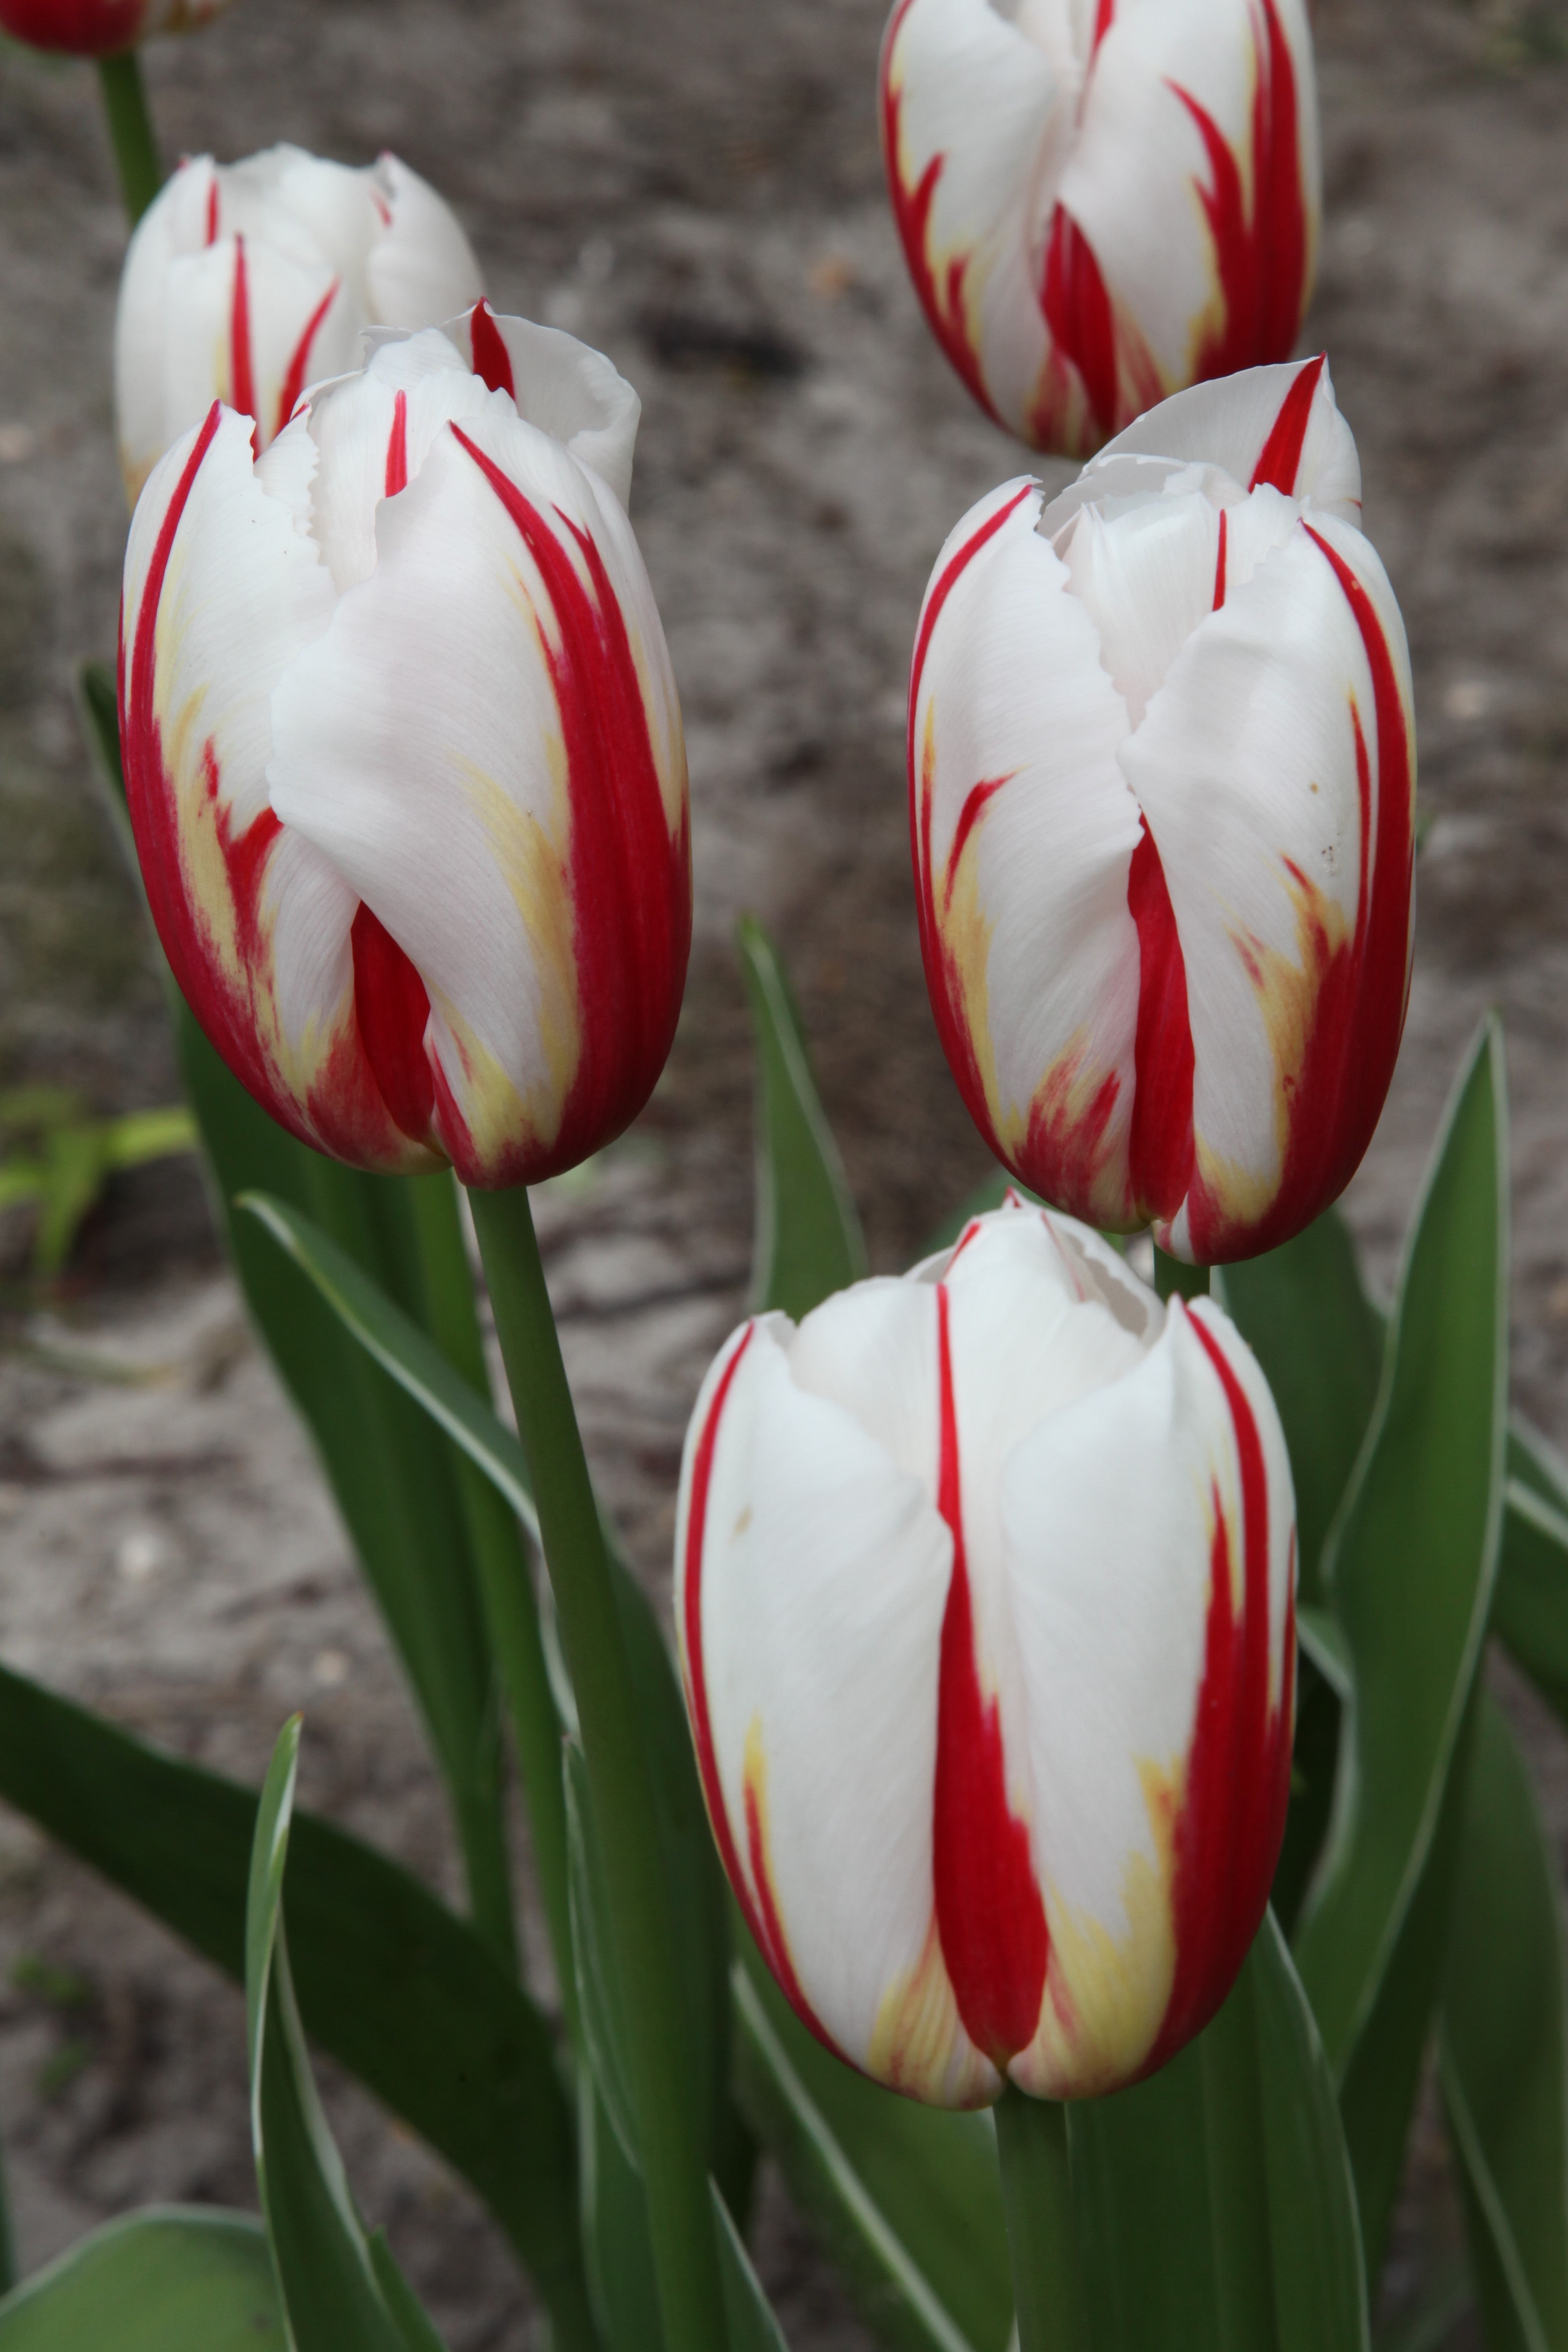 Triumph tulips happy generation, group with white blooms and red streaks